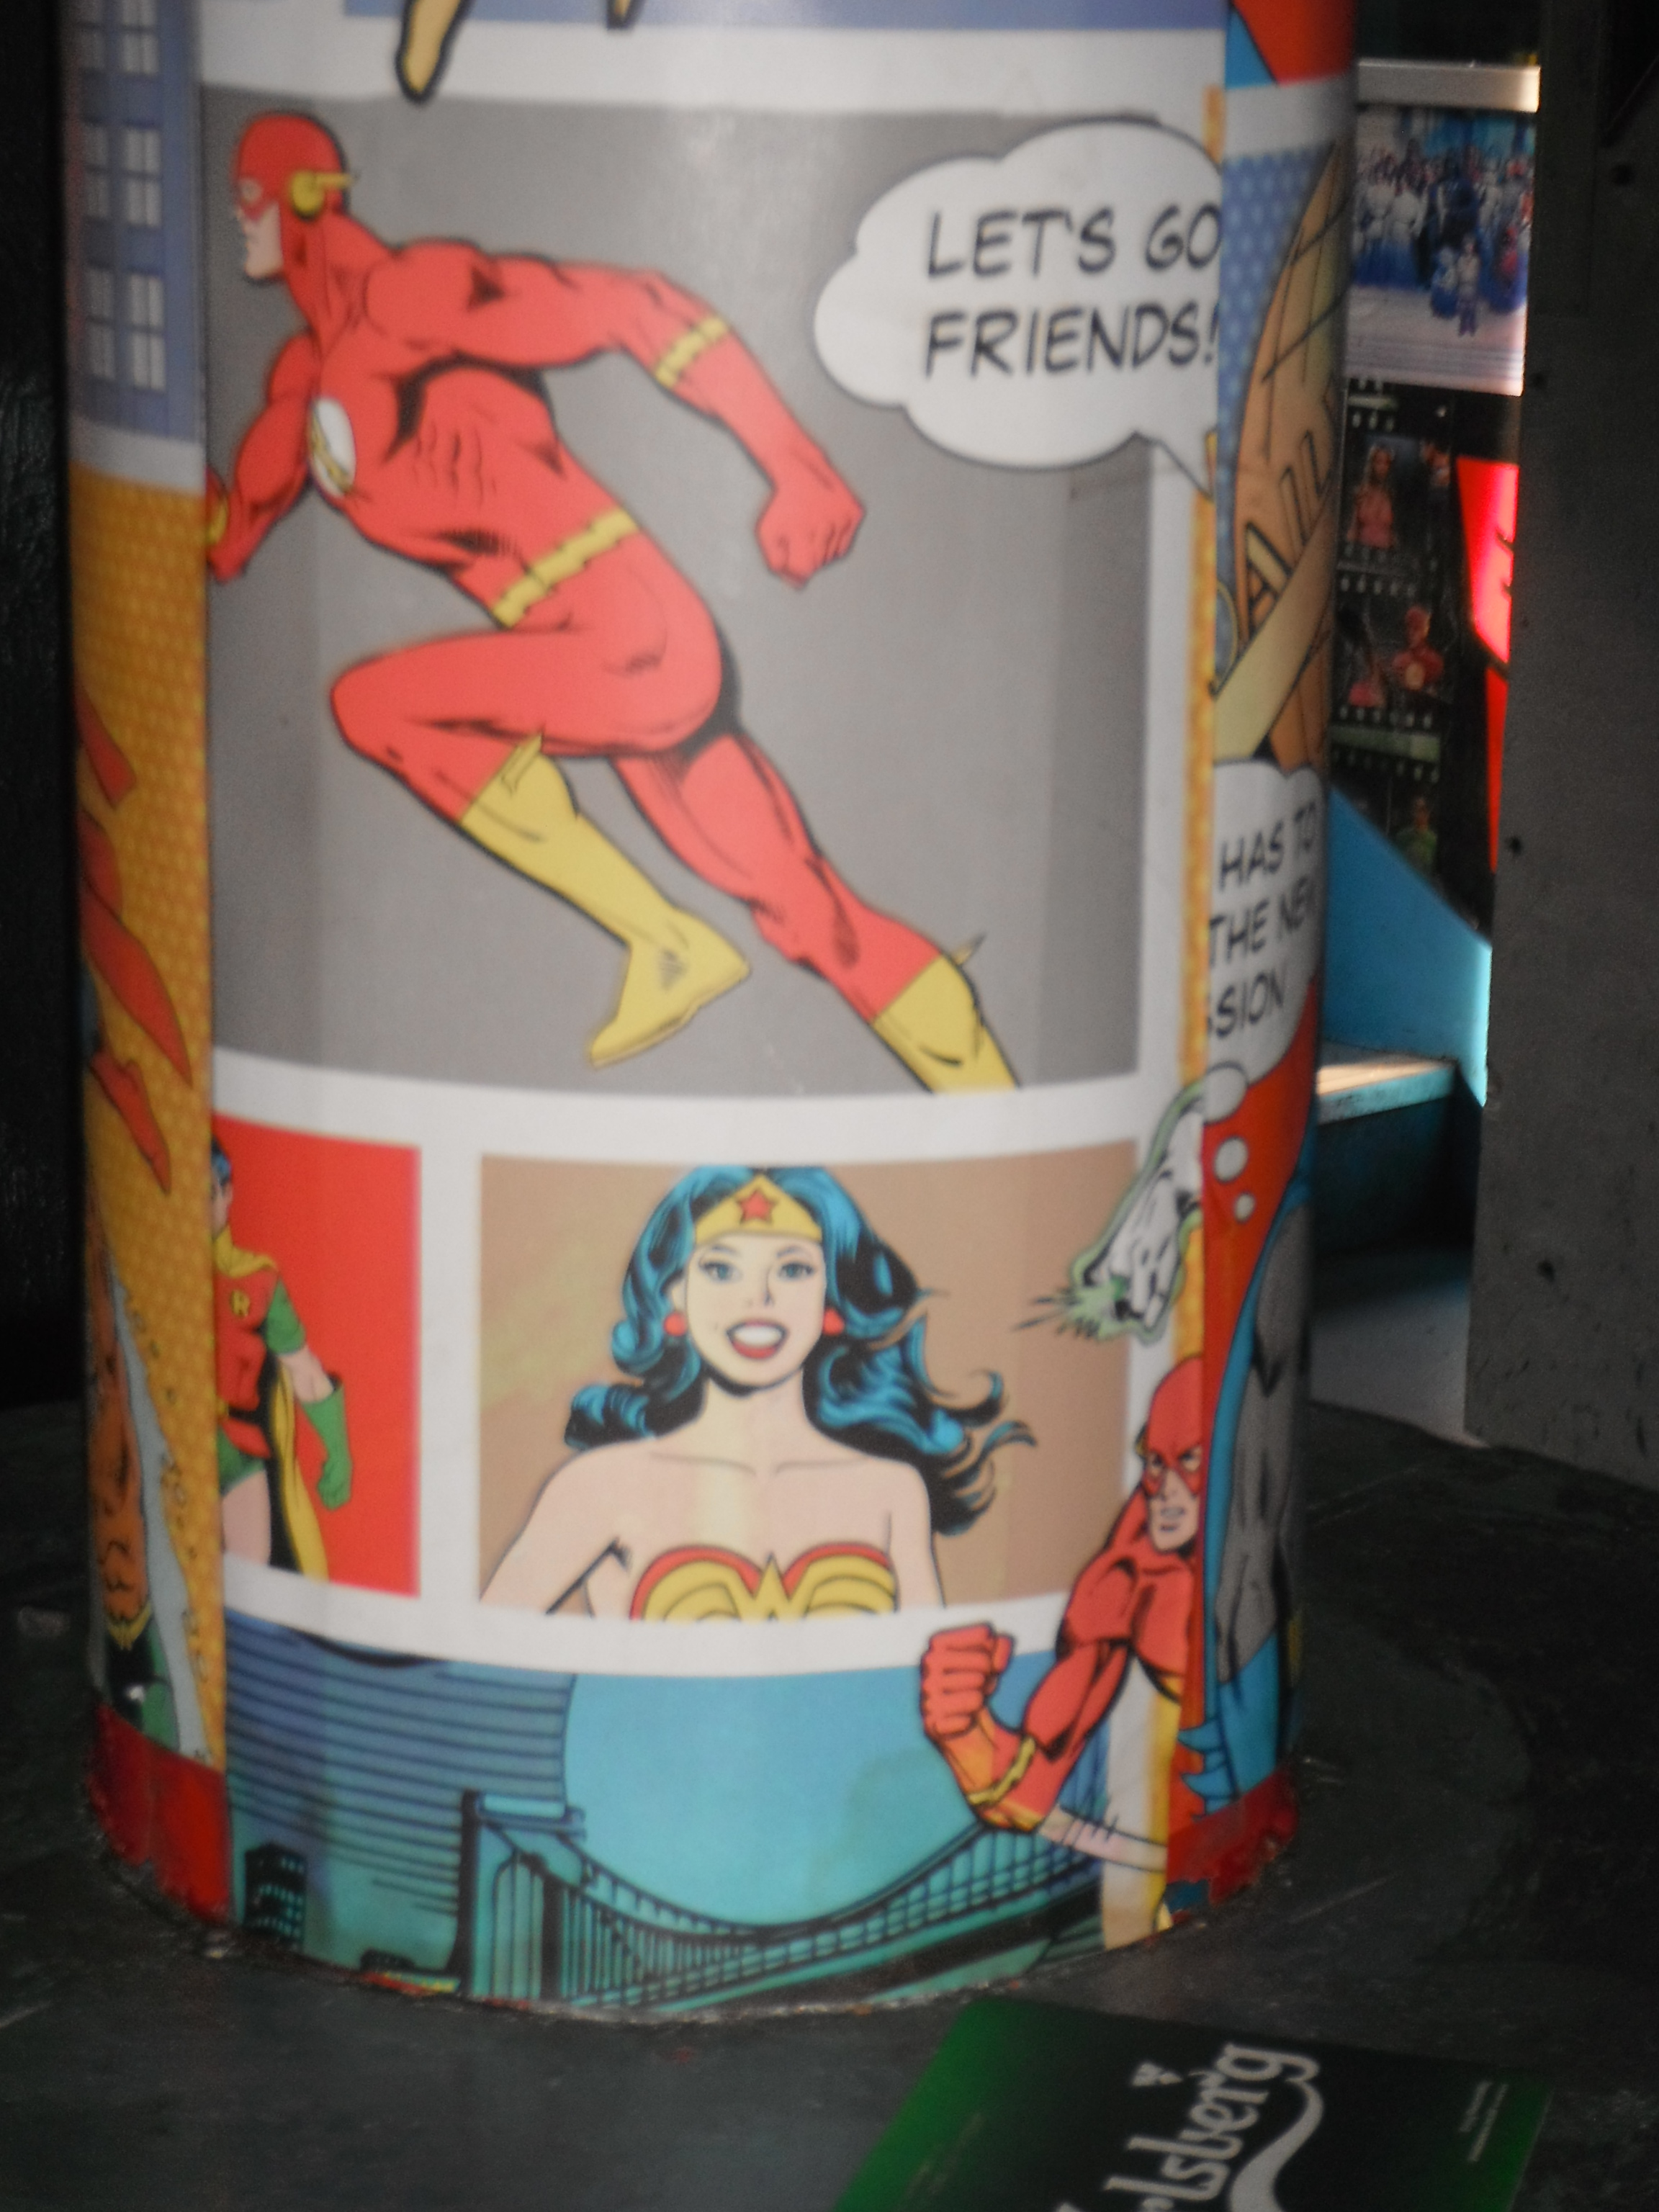 Photo taken by me - Wonder Woman And The Flash comic art, FAB Cafe, Manchester 